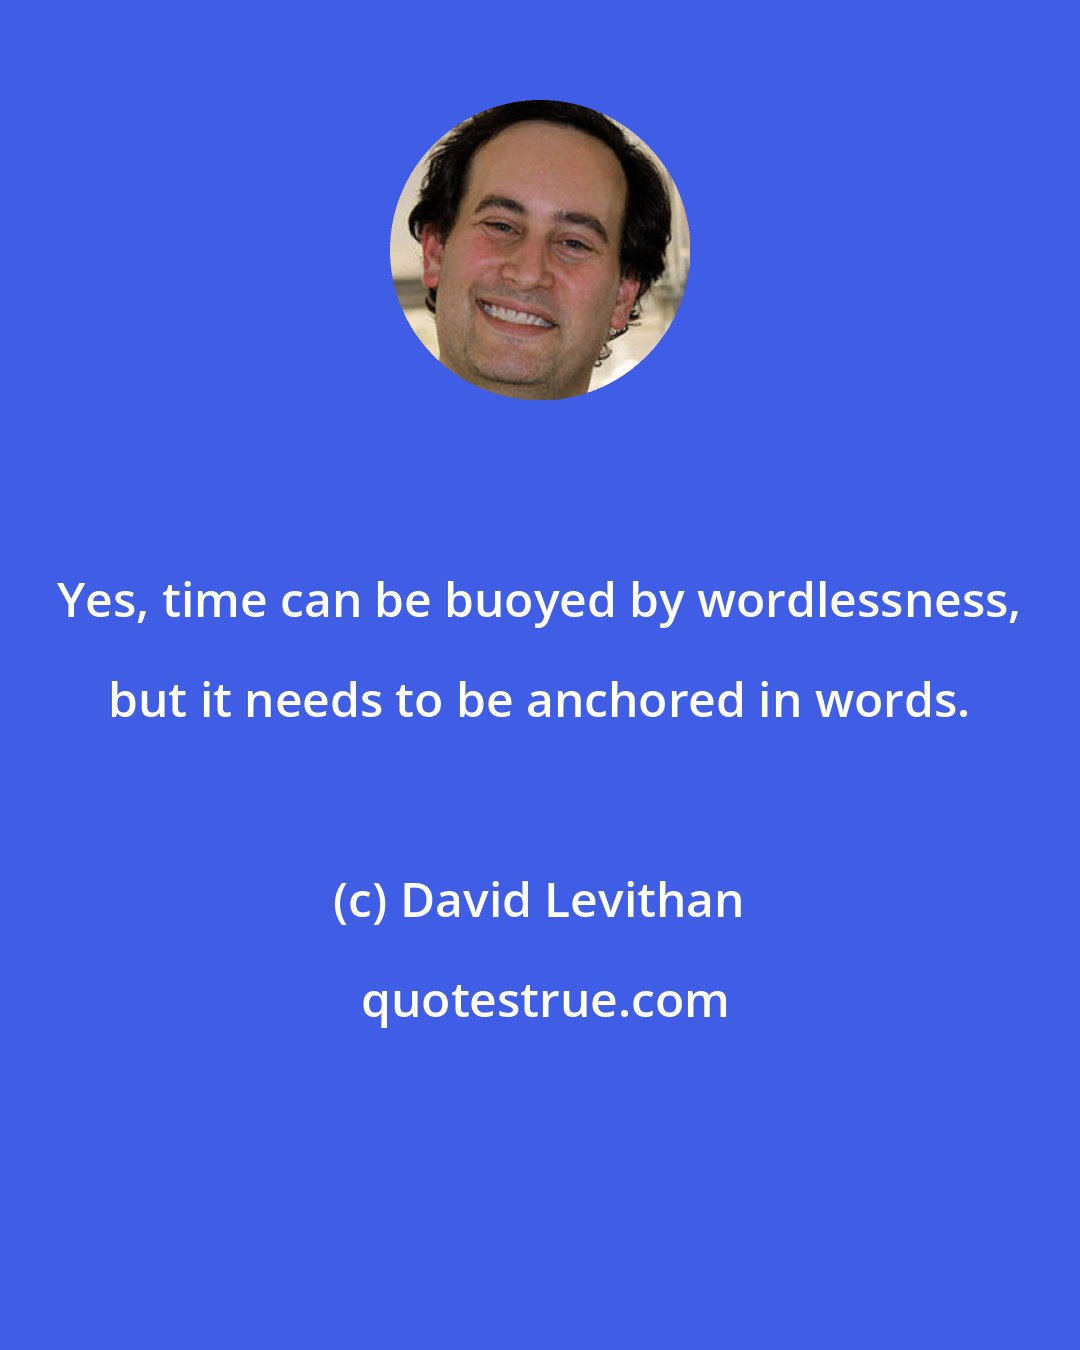 David Levithan: Yes, time can be buoyed by wordlessness, but it needs to be anchored in words.